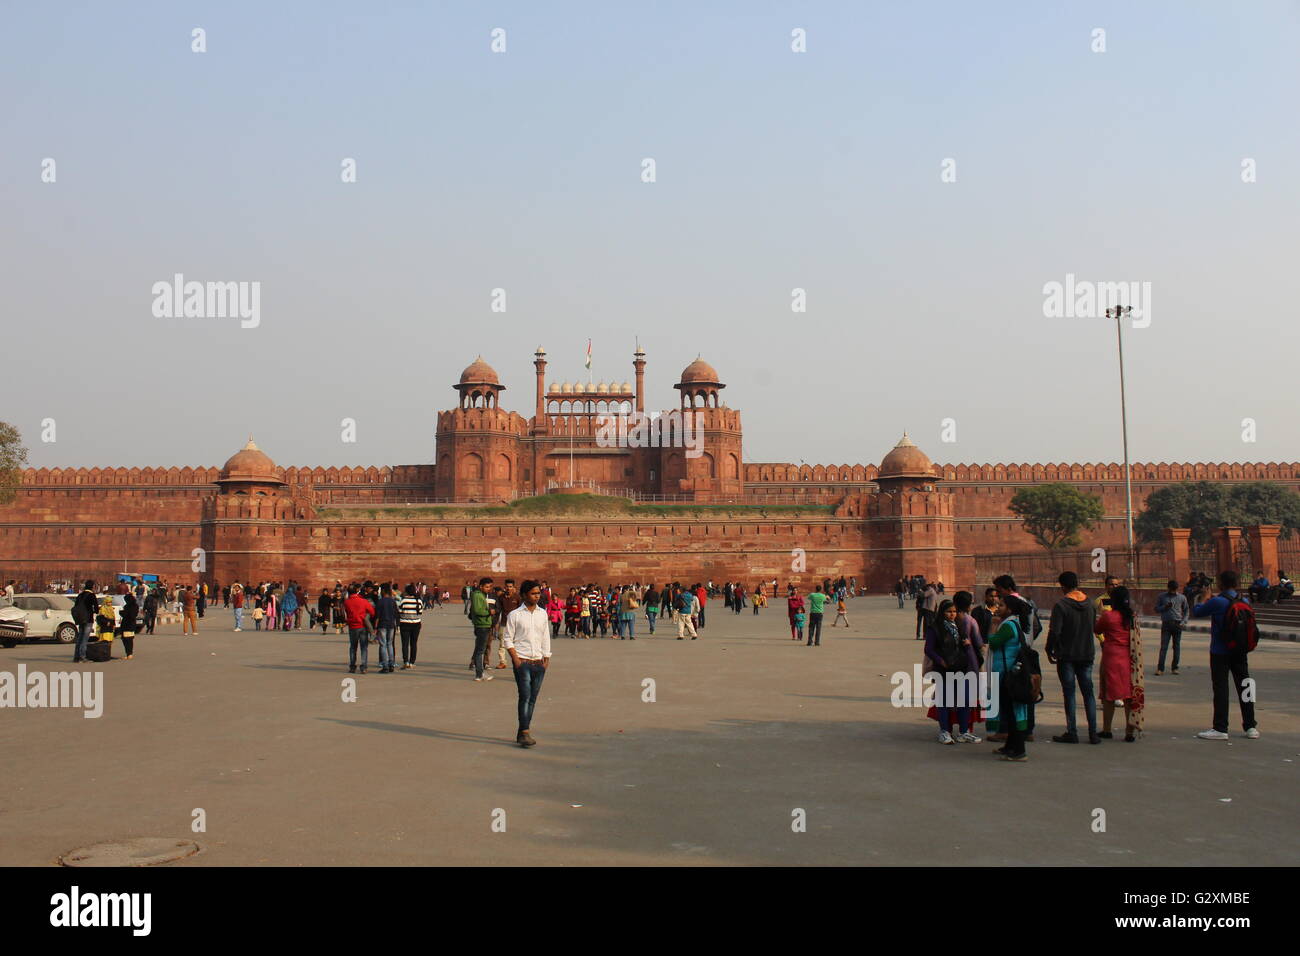 The Red Fort - The residence of the Mughal emperor for nearly 200 years, until 1857. It is located in the centre of Delhi. Stock Photo